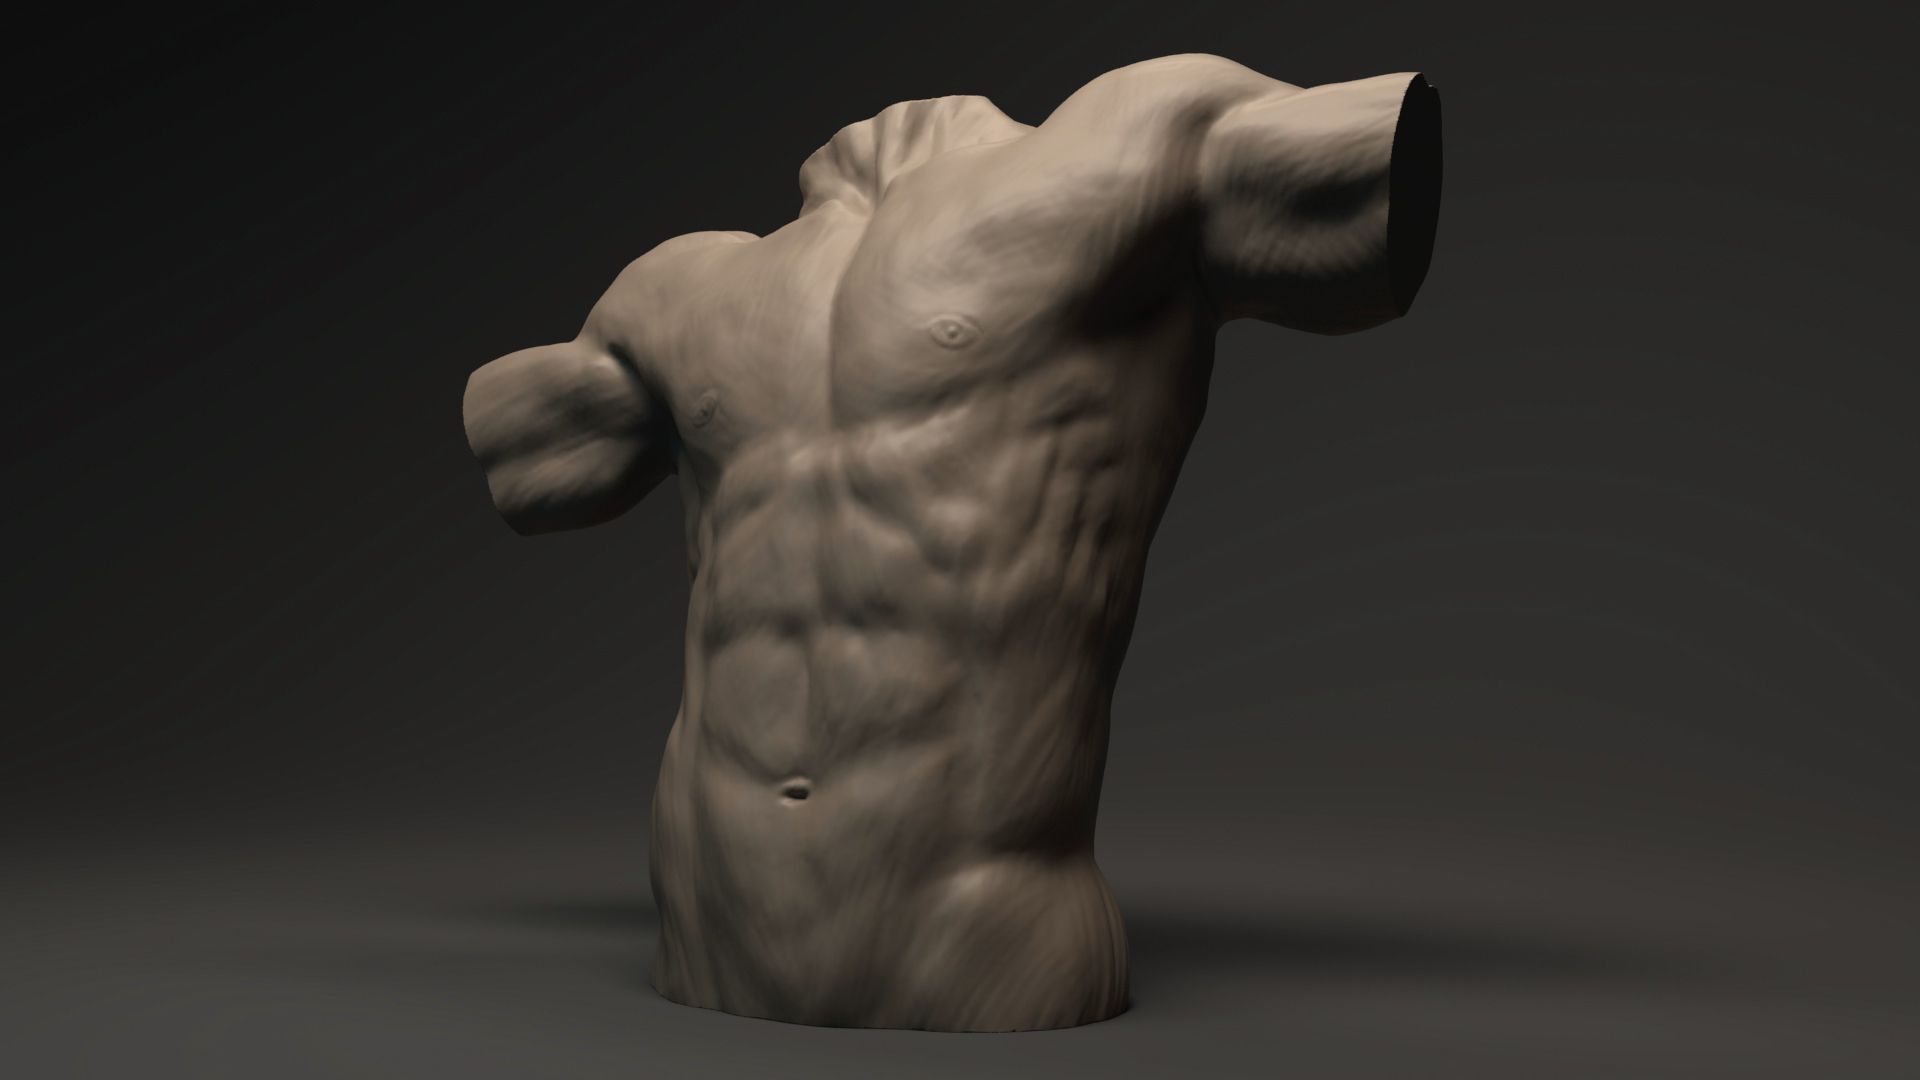 A Three Quarter Front View of a Sculpted Anatomy Study of Male Torso